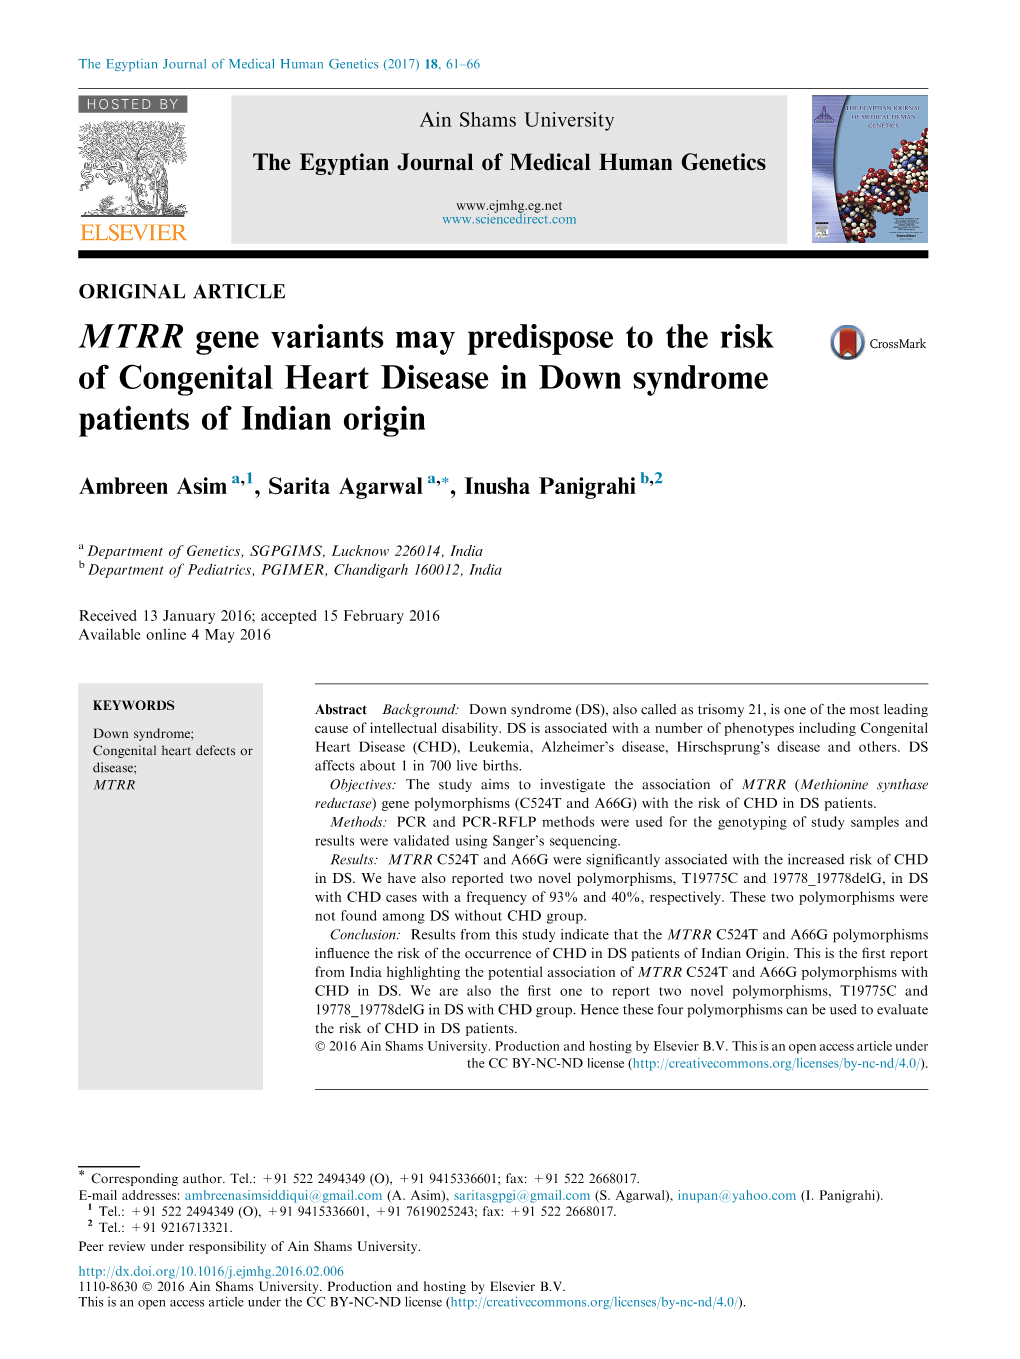 MTRR Gene Variants May Predispose to the Risk of Congenital Heart Disease in Down Syndrome Patients of Indian Origin